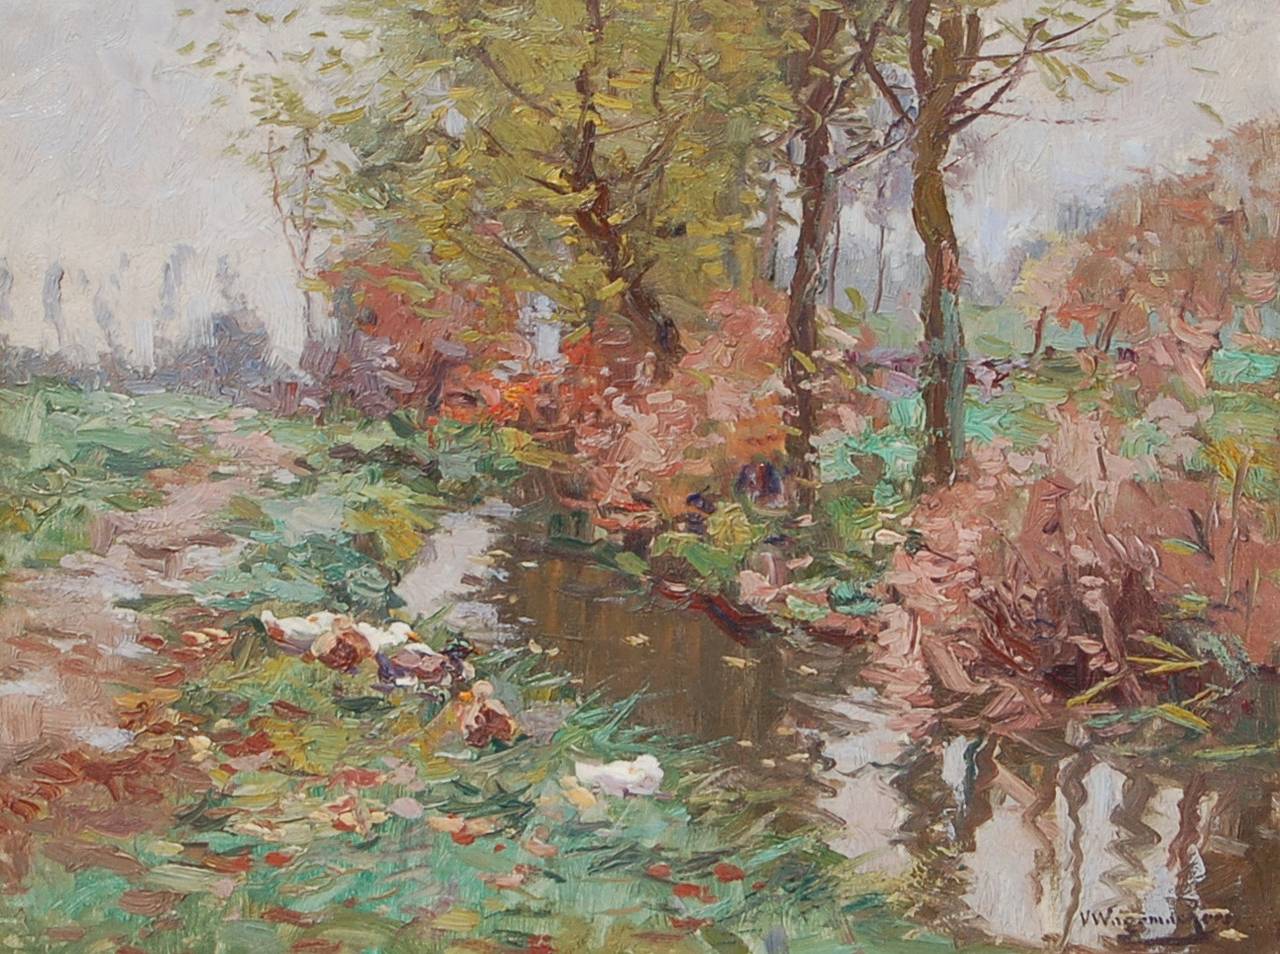 Resting Ducks - Painting by Victor Wagemaekers